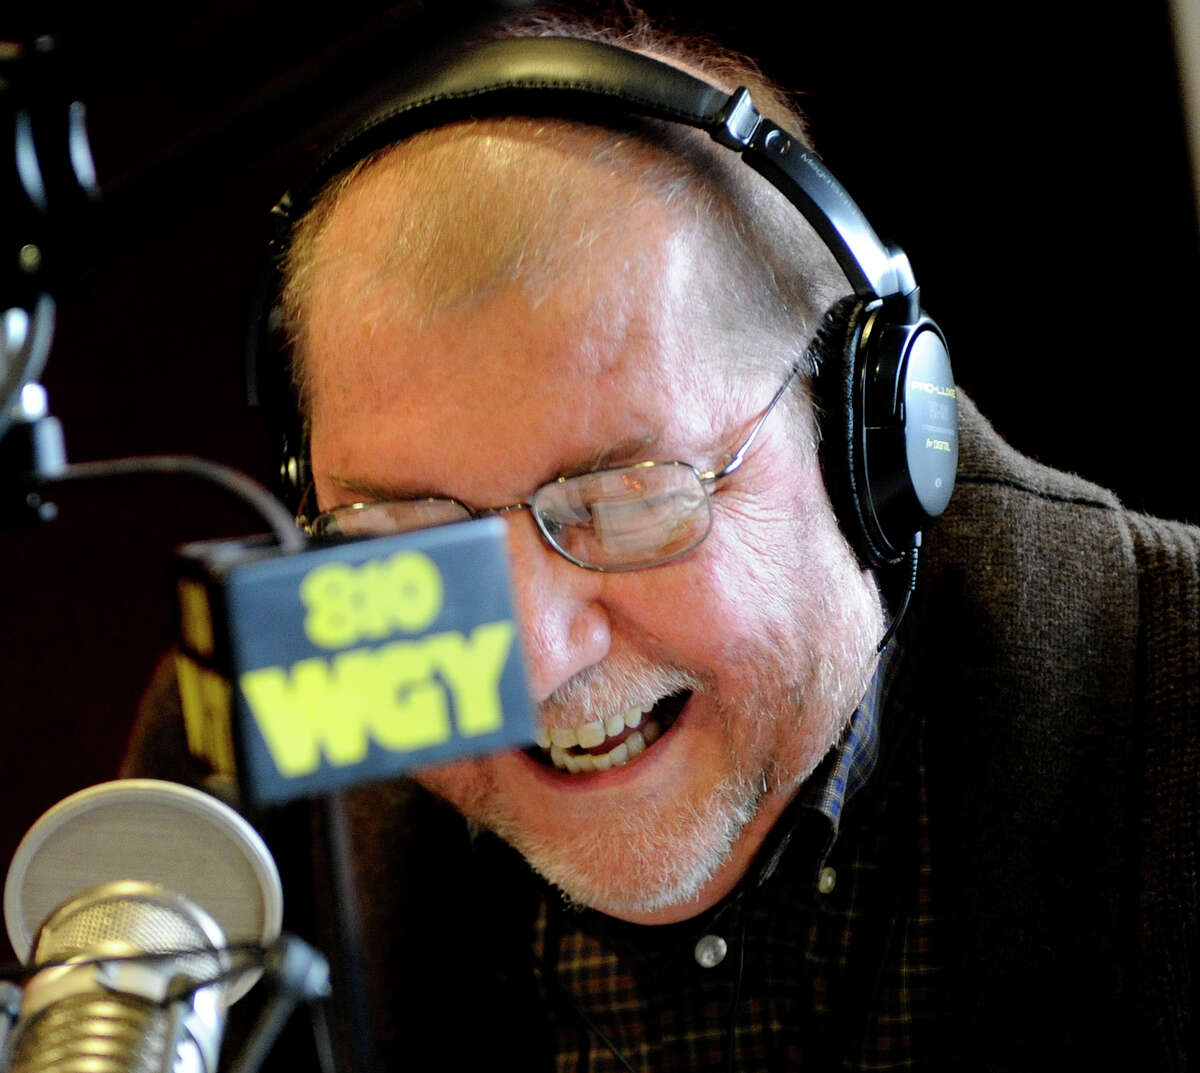 Radio personality Don Weeks enjoys a last laugh as he winds up his last moments after a thirty year career at WGY in Latham December 3, 2010. (Skip Dickstein / Times Union)